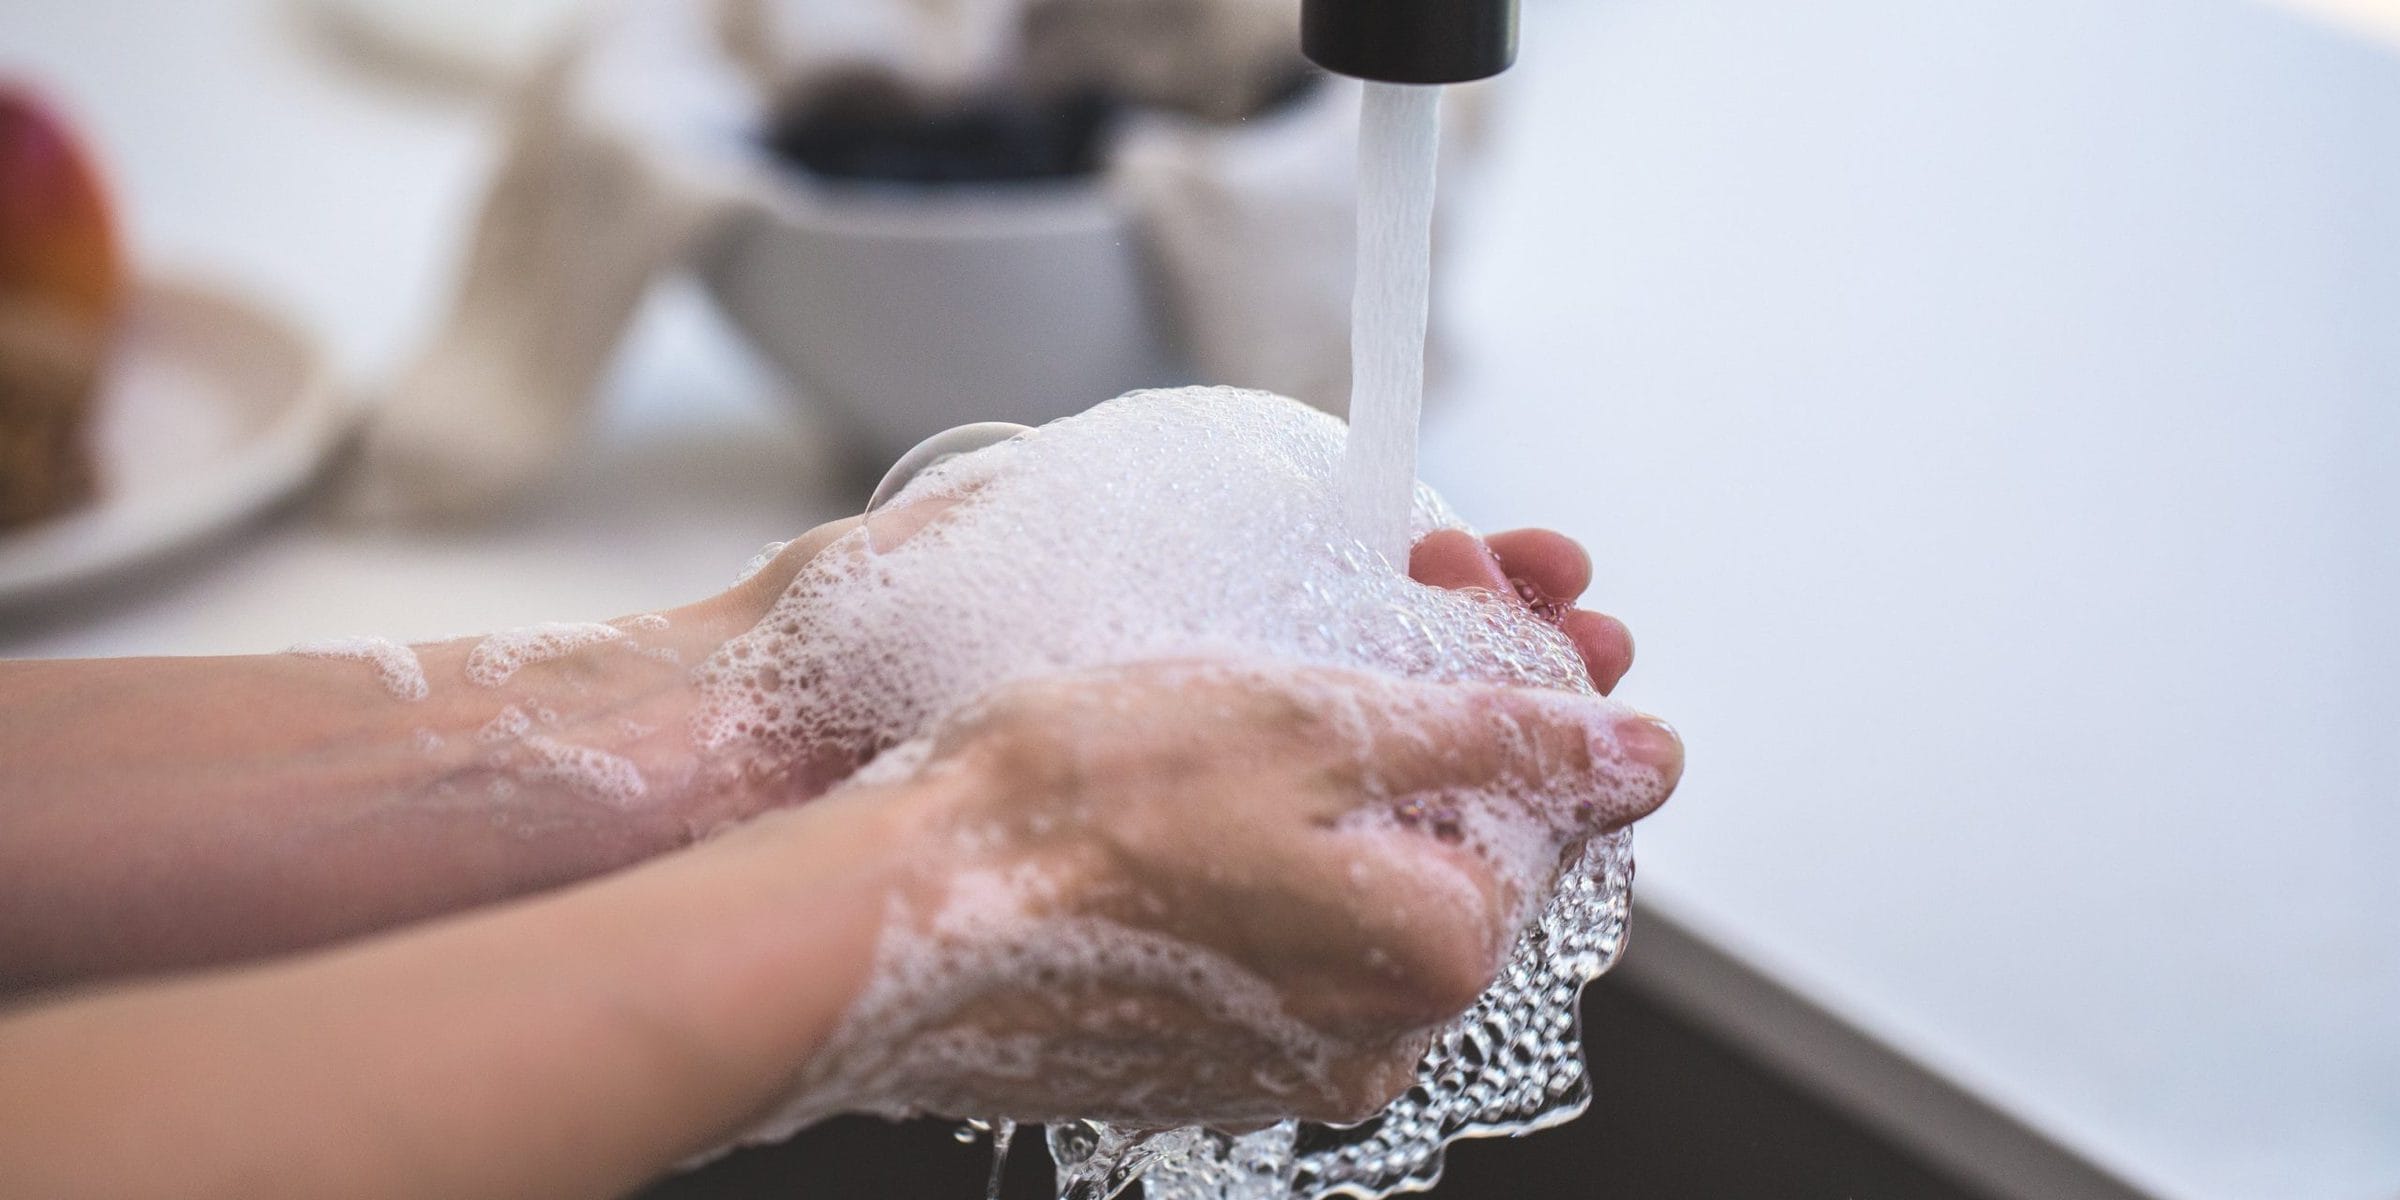 Washing your hands is the best defense against coronavirus.